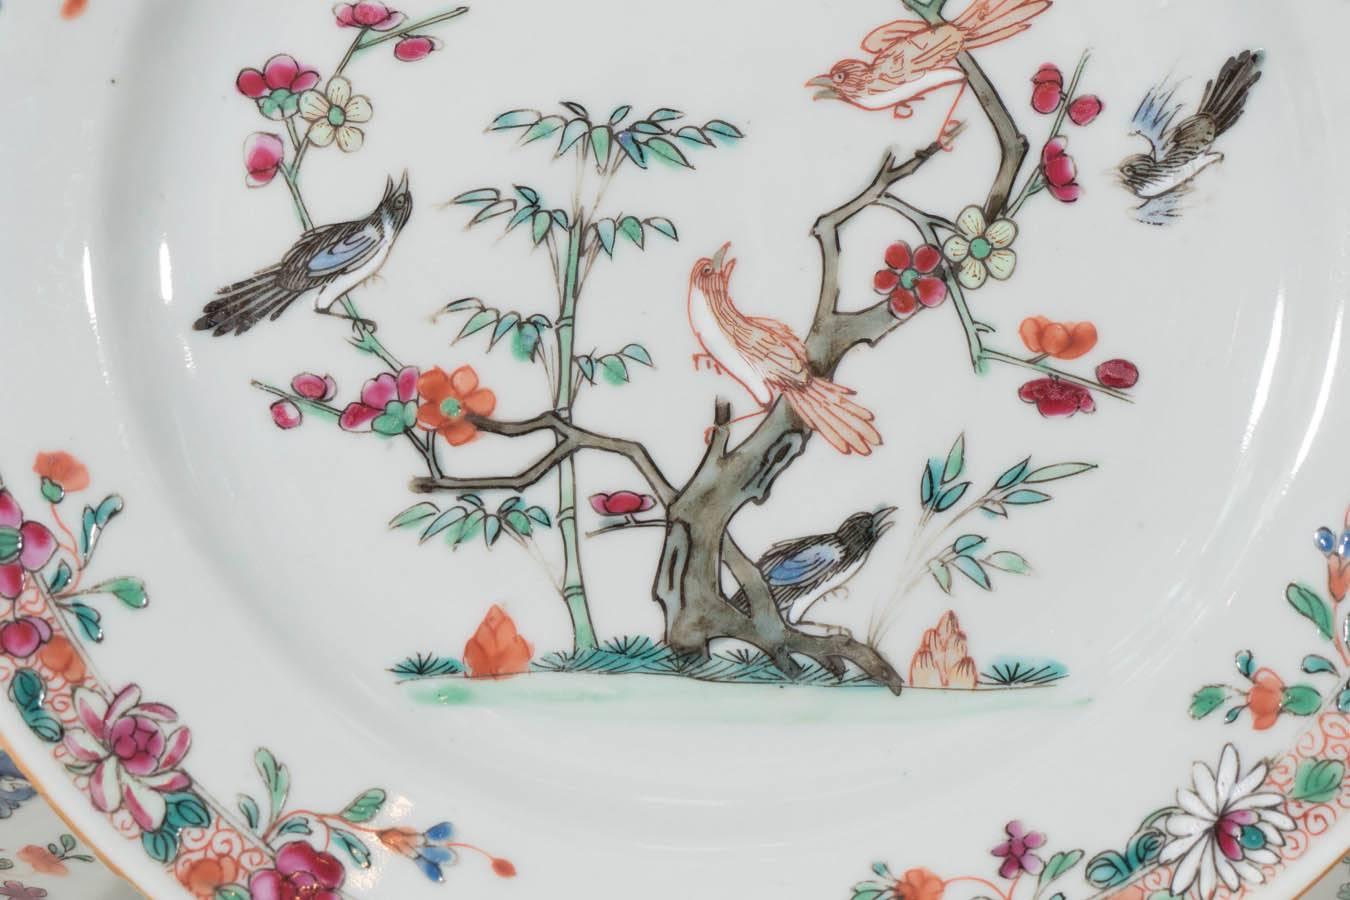 A set of ten Famille Rose, mid-18th century, Chinese dishes painted in rich enamels showing a lovely garden scene with three pairs of songbirds amidst bamboo and flowering trees. In Chinese tradition this imagery symbolizes youth, beauty, and good